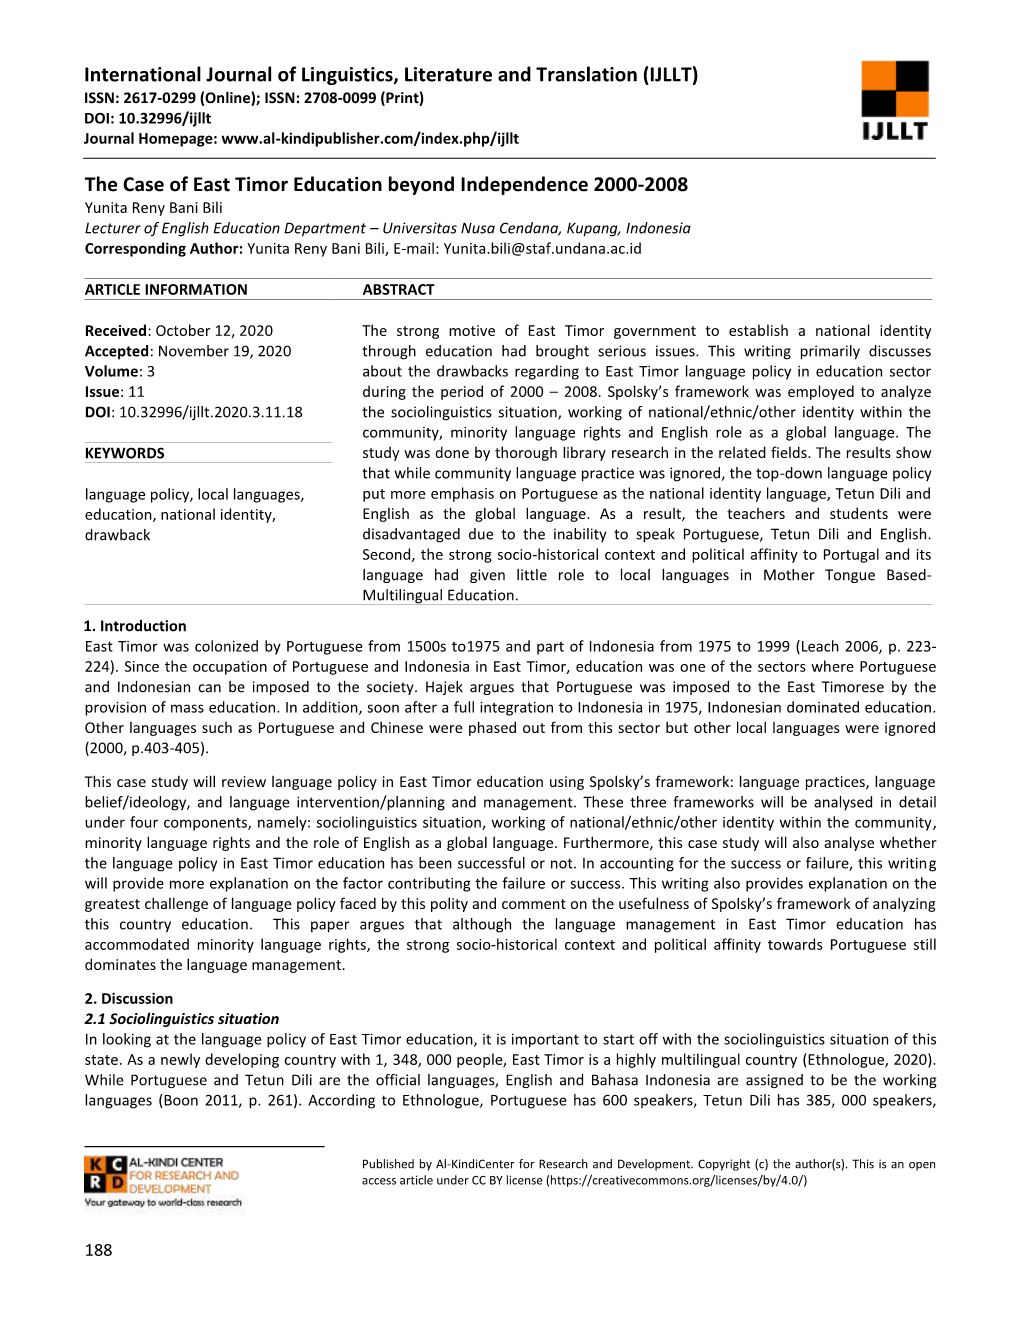 (IJLLT) the Case of East Timor Education Beyond Independence 20